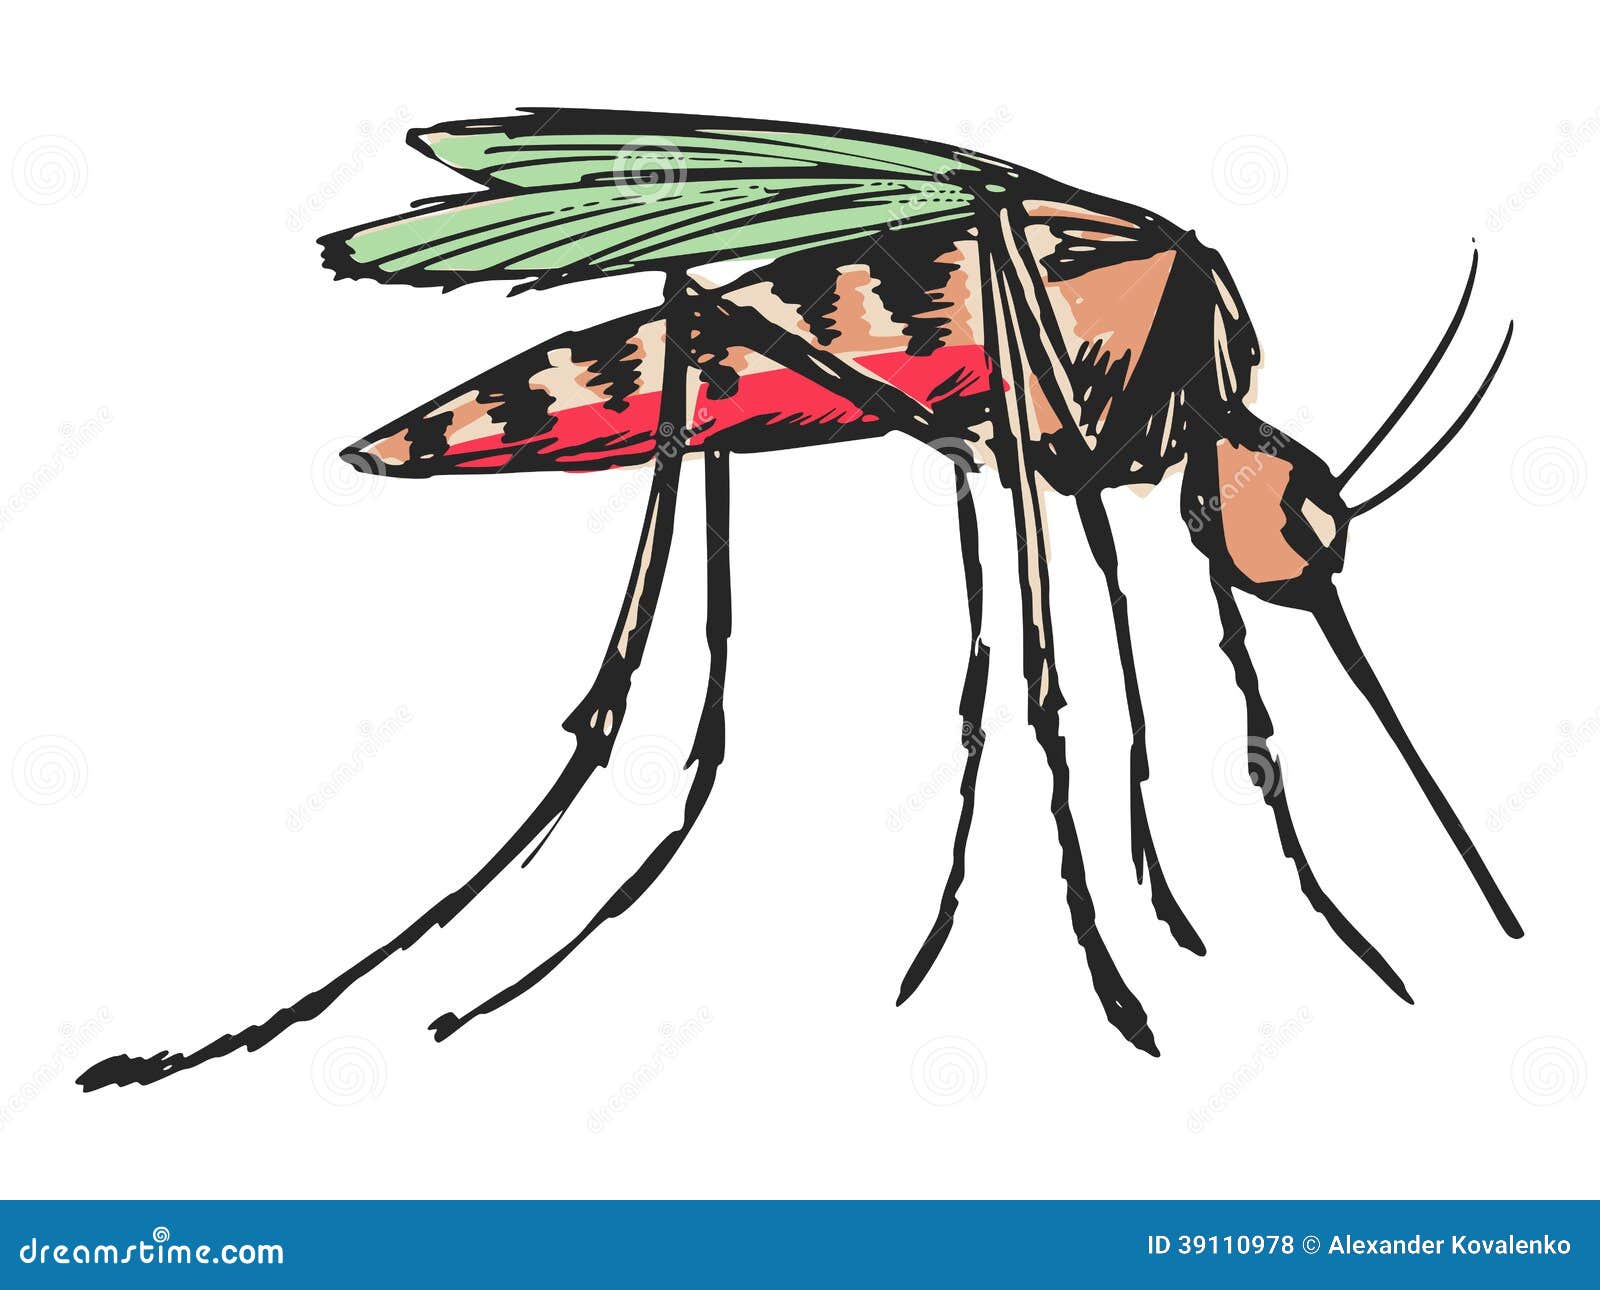 How to Draw a Mosquito Step by Step for Kids